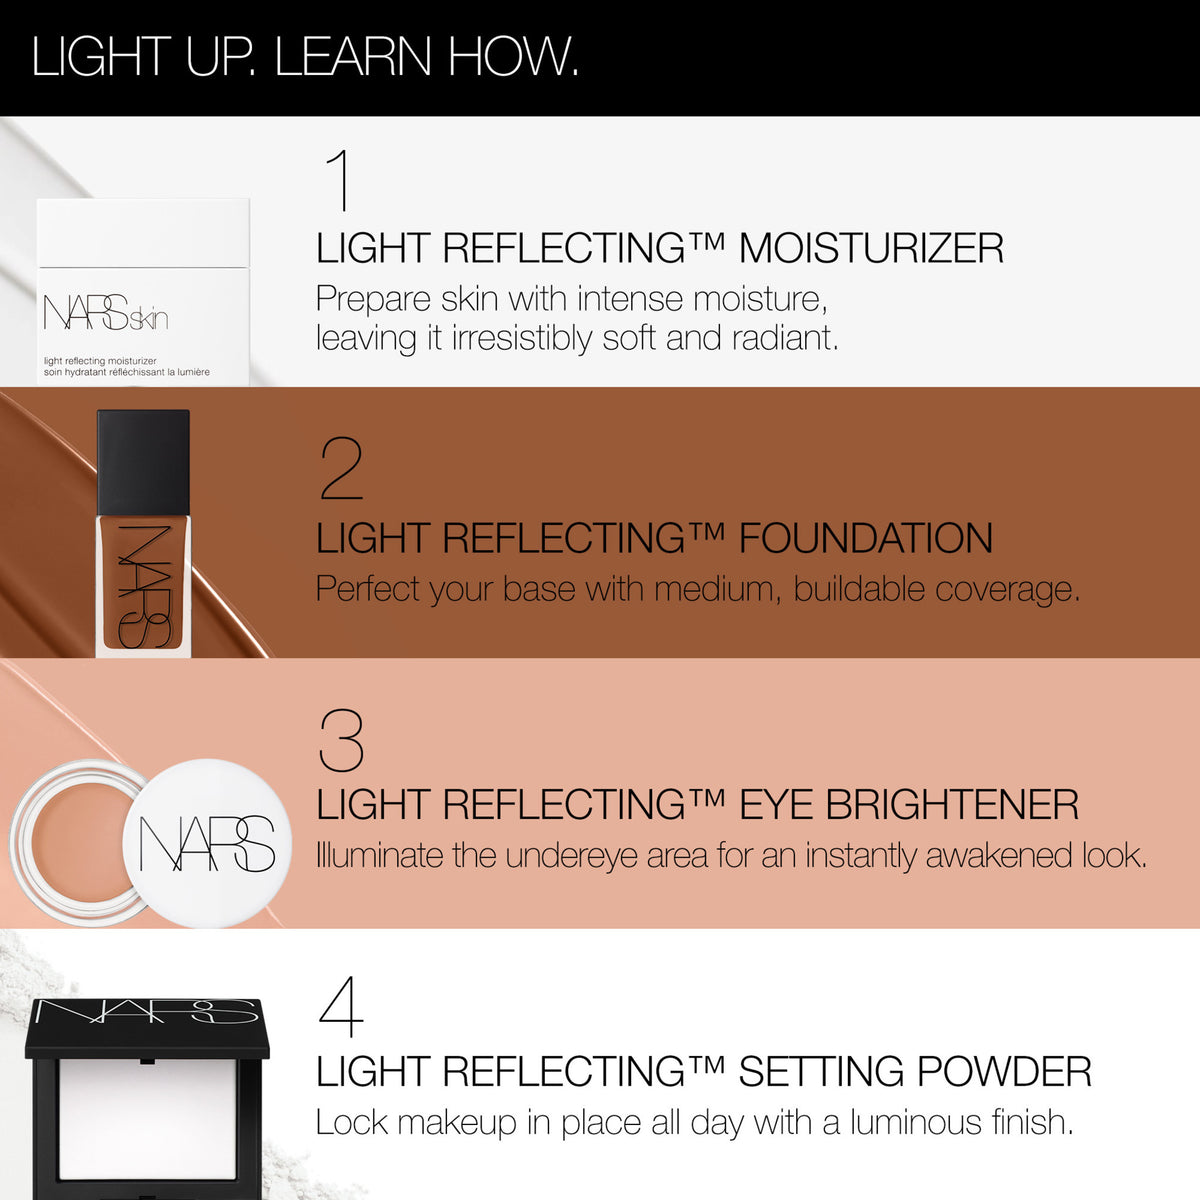 Nars Light Reflecting Eye Brightener . This product is for light complexions